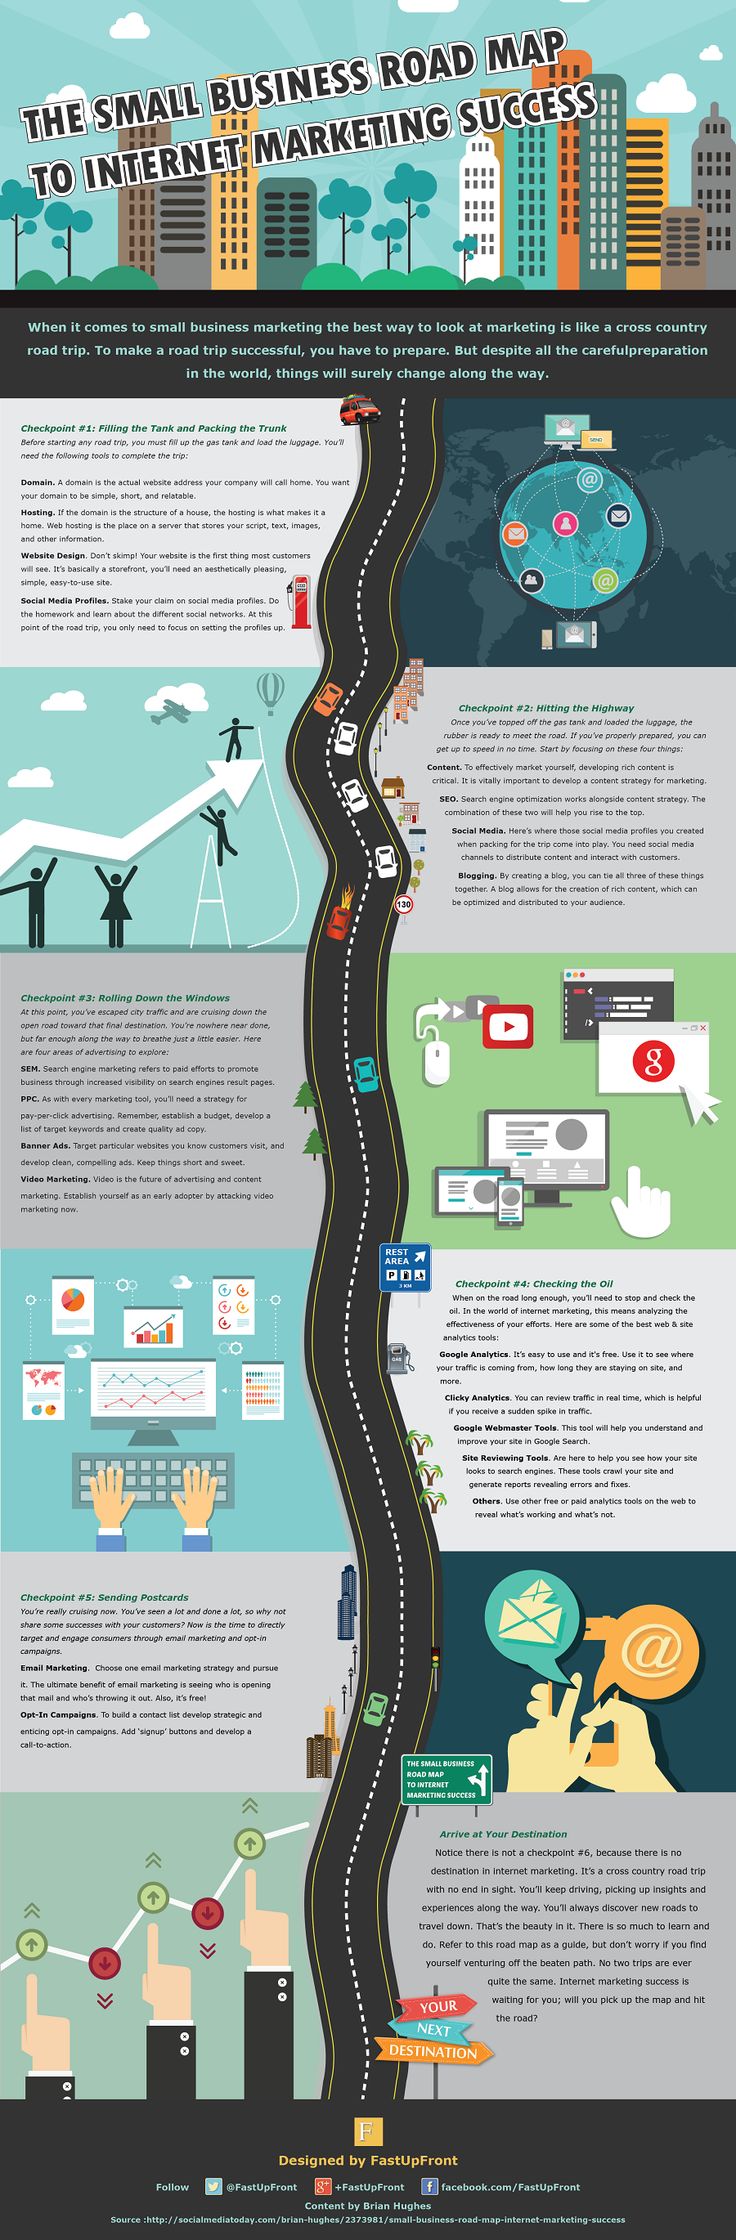 The Small Business Road Map To Internet Marketing Success